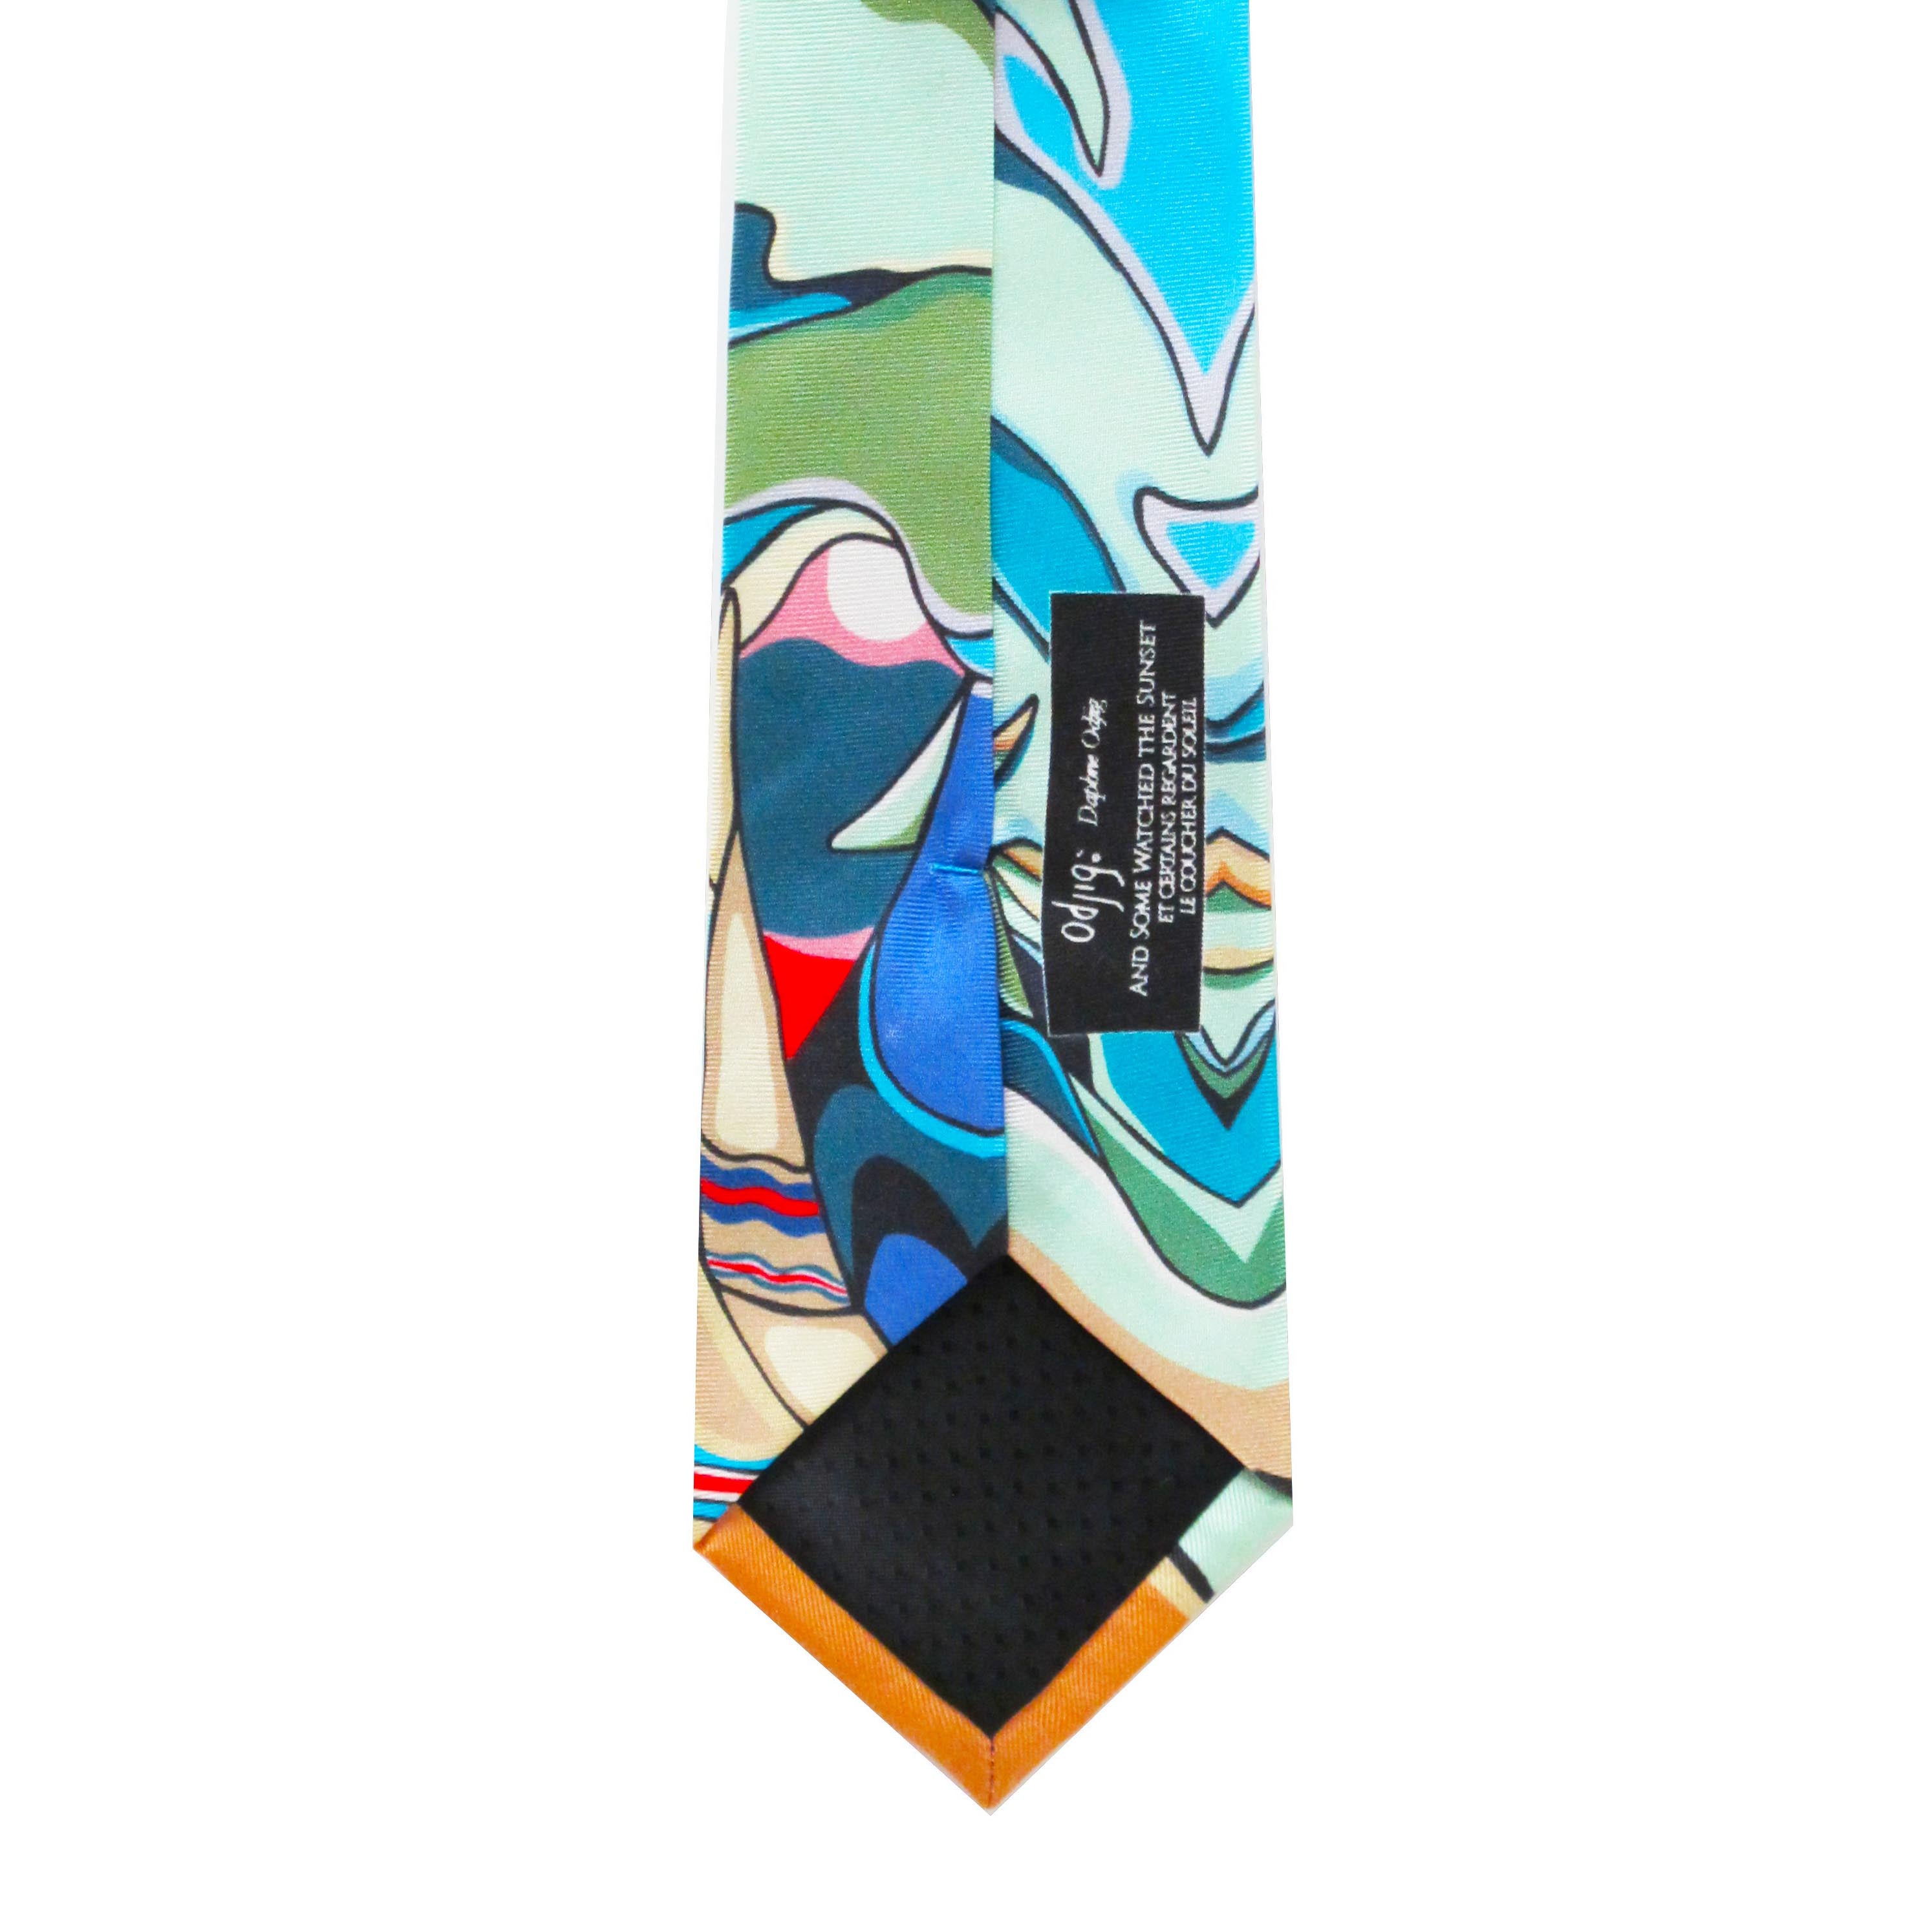 Daphne Odjig And Some Watched The Sunset Artist Design Silk Tie